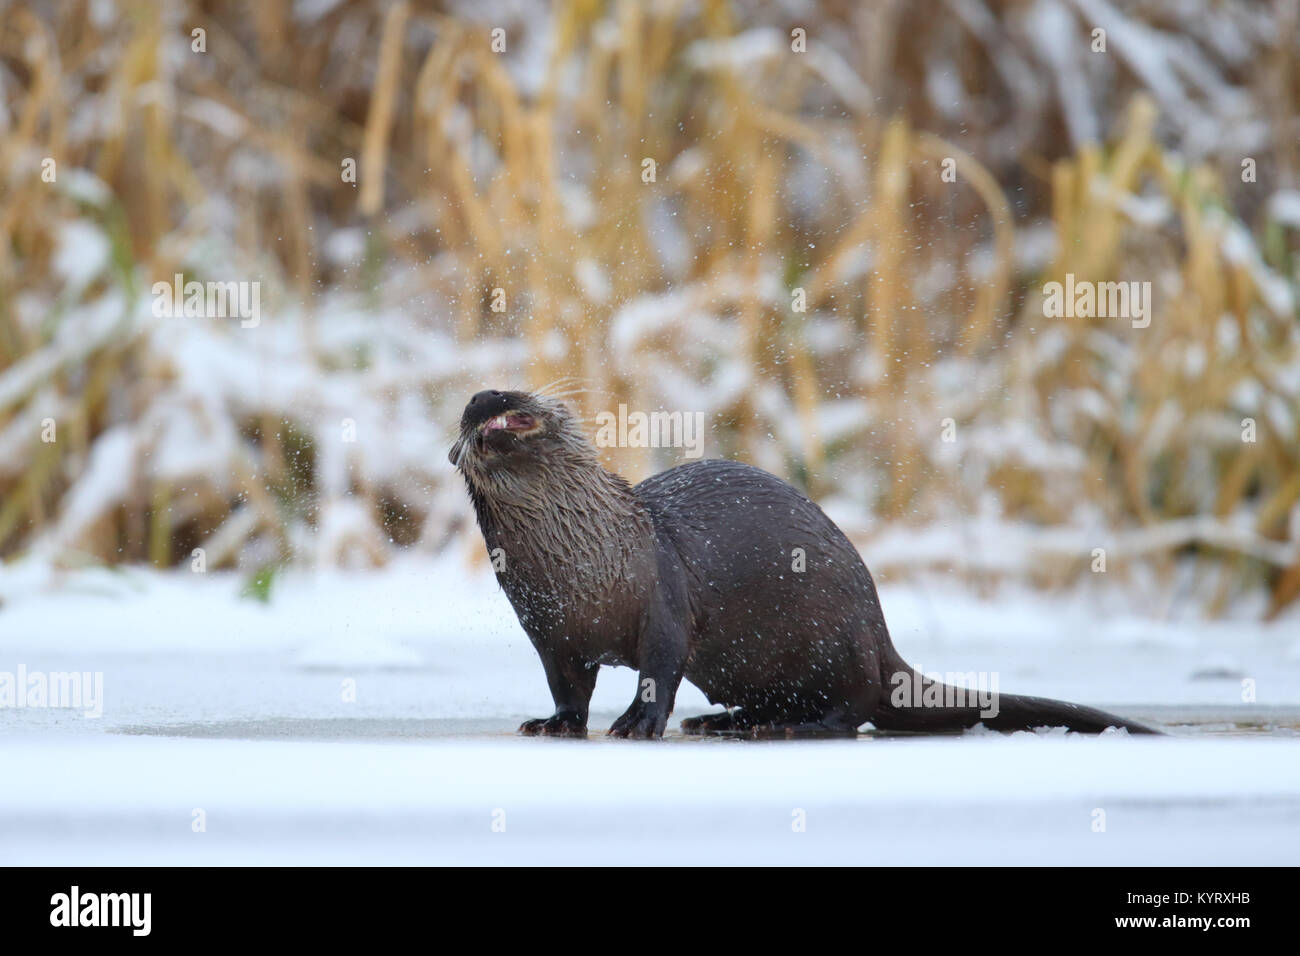 Wild European otter (Lutra lutra) shaking water off his fur, Europe Stock Photo